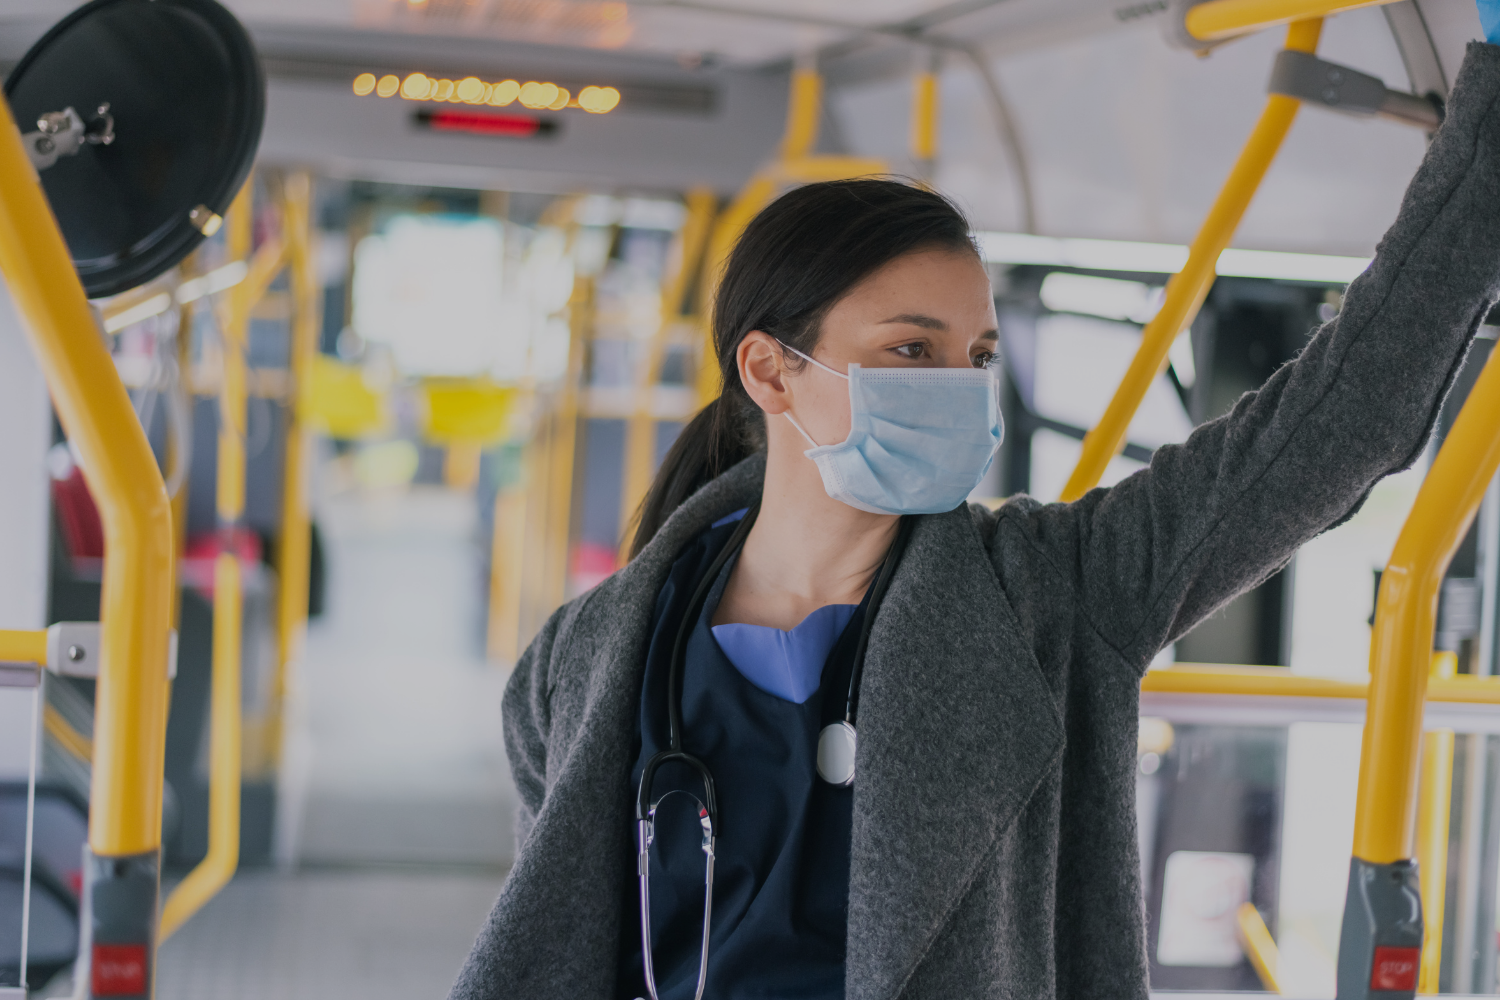 Nurse with stethoscope wearing mask standing on subway train.